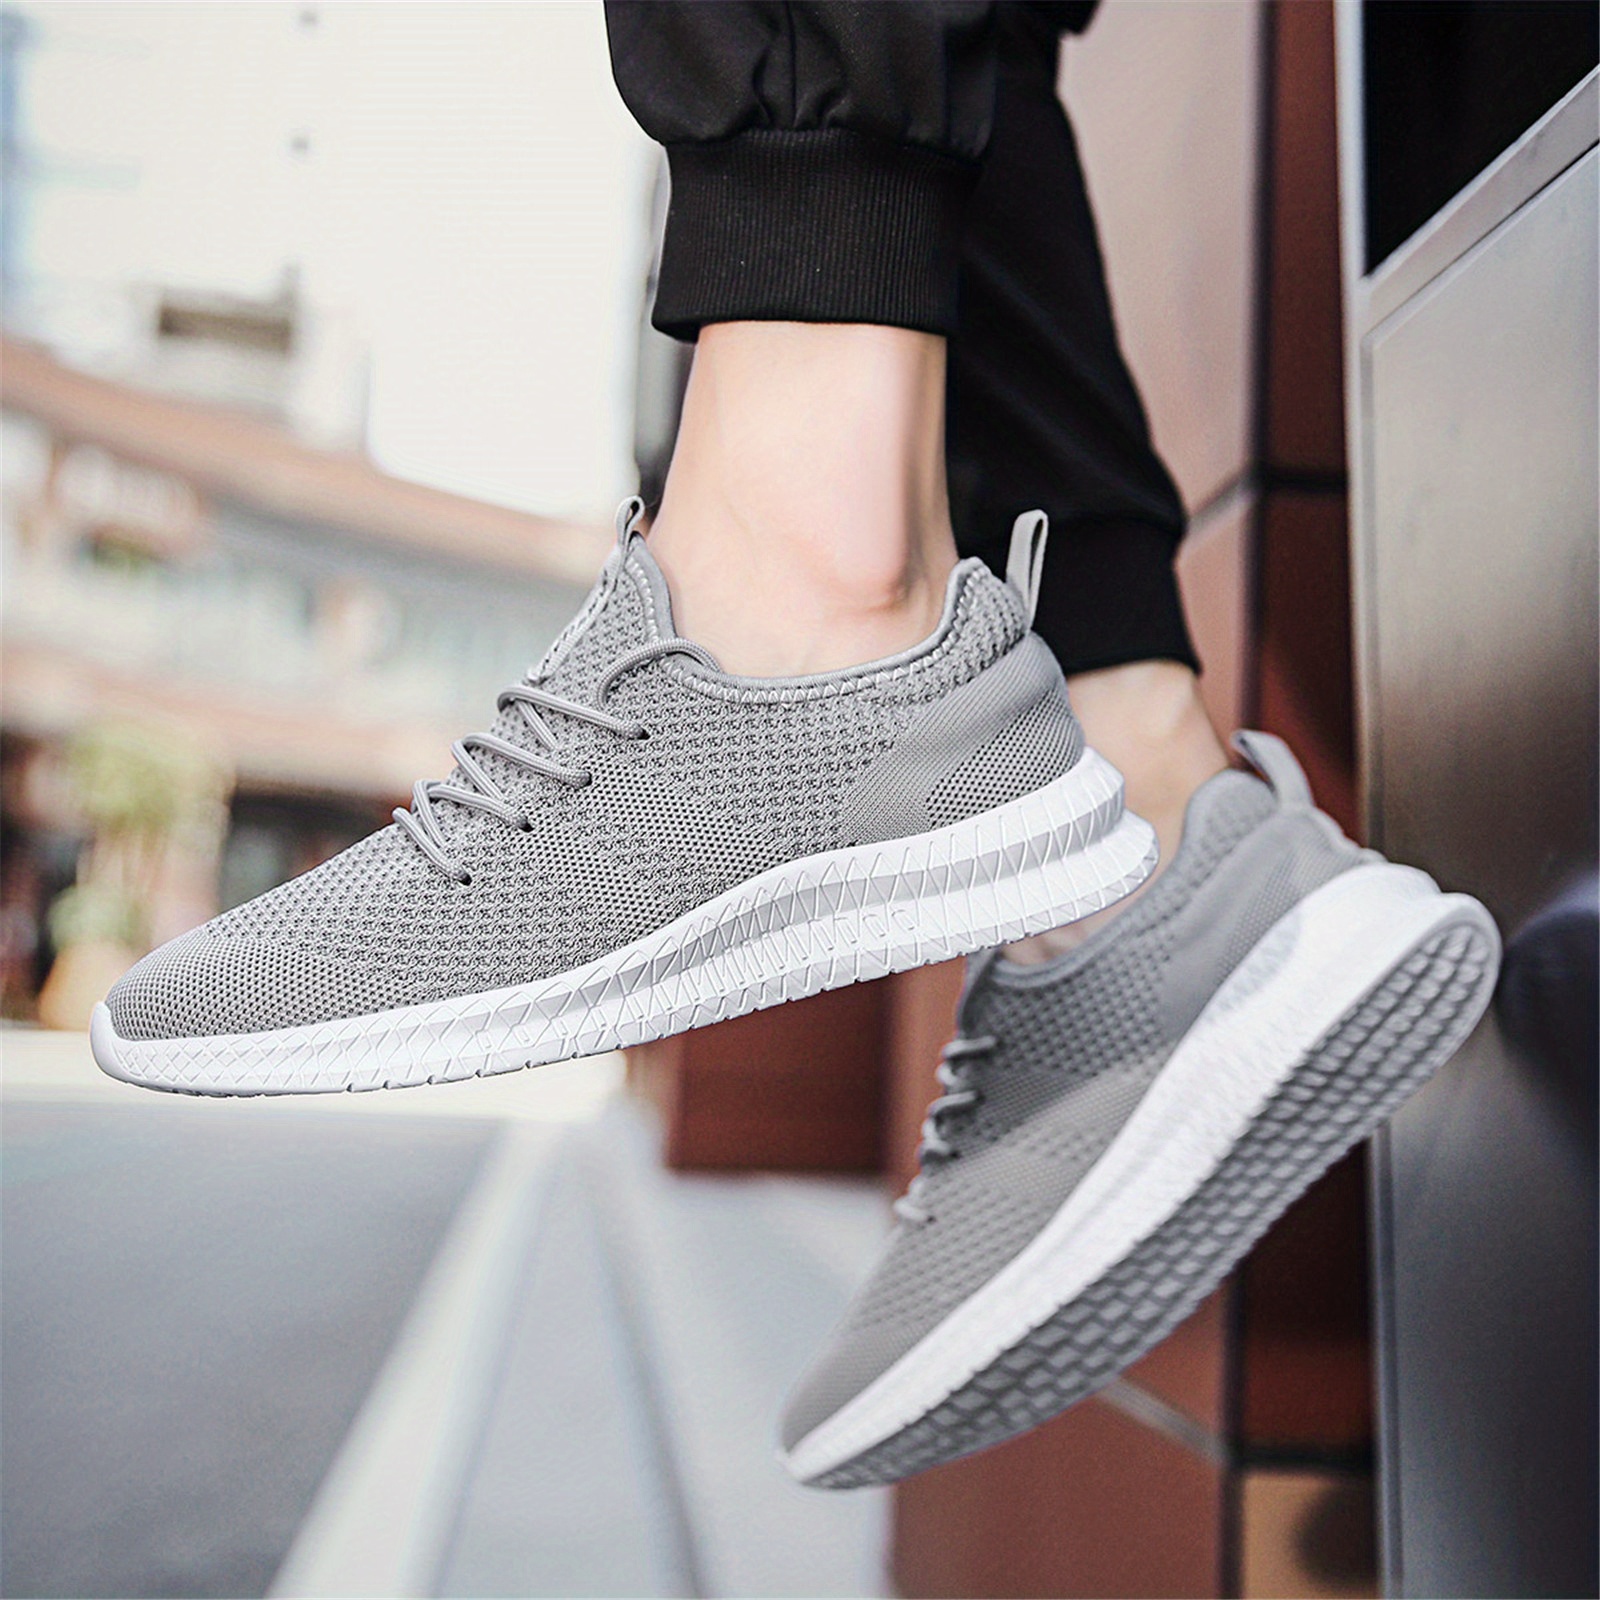 mens trendy breathable lace up knit sneakers with assorted colors casual outdoor running walking shoes details 13